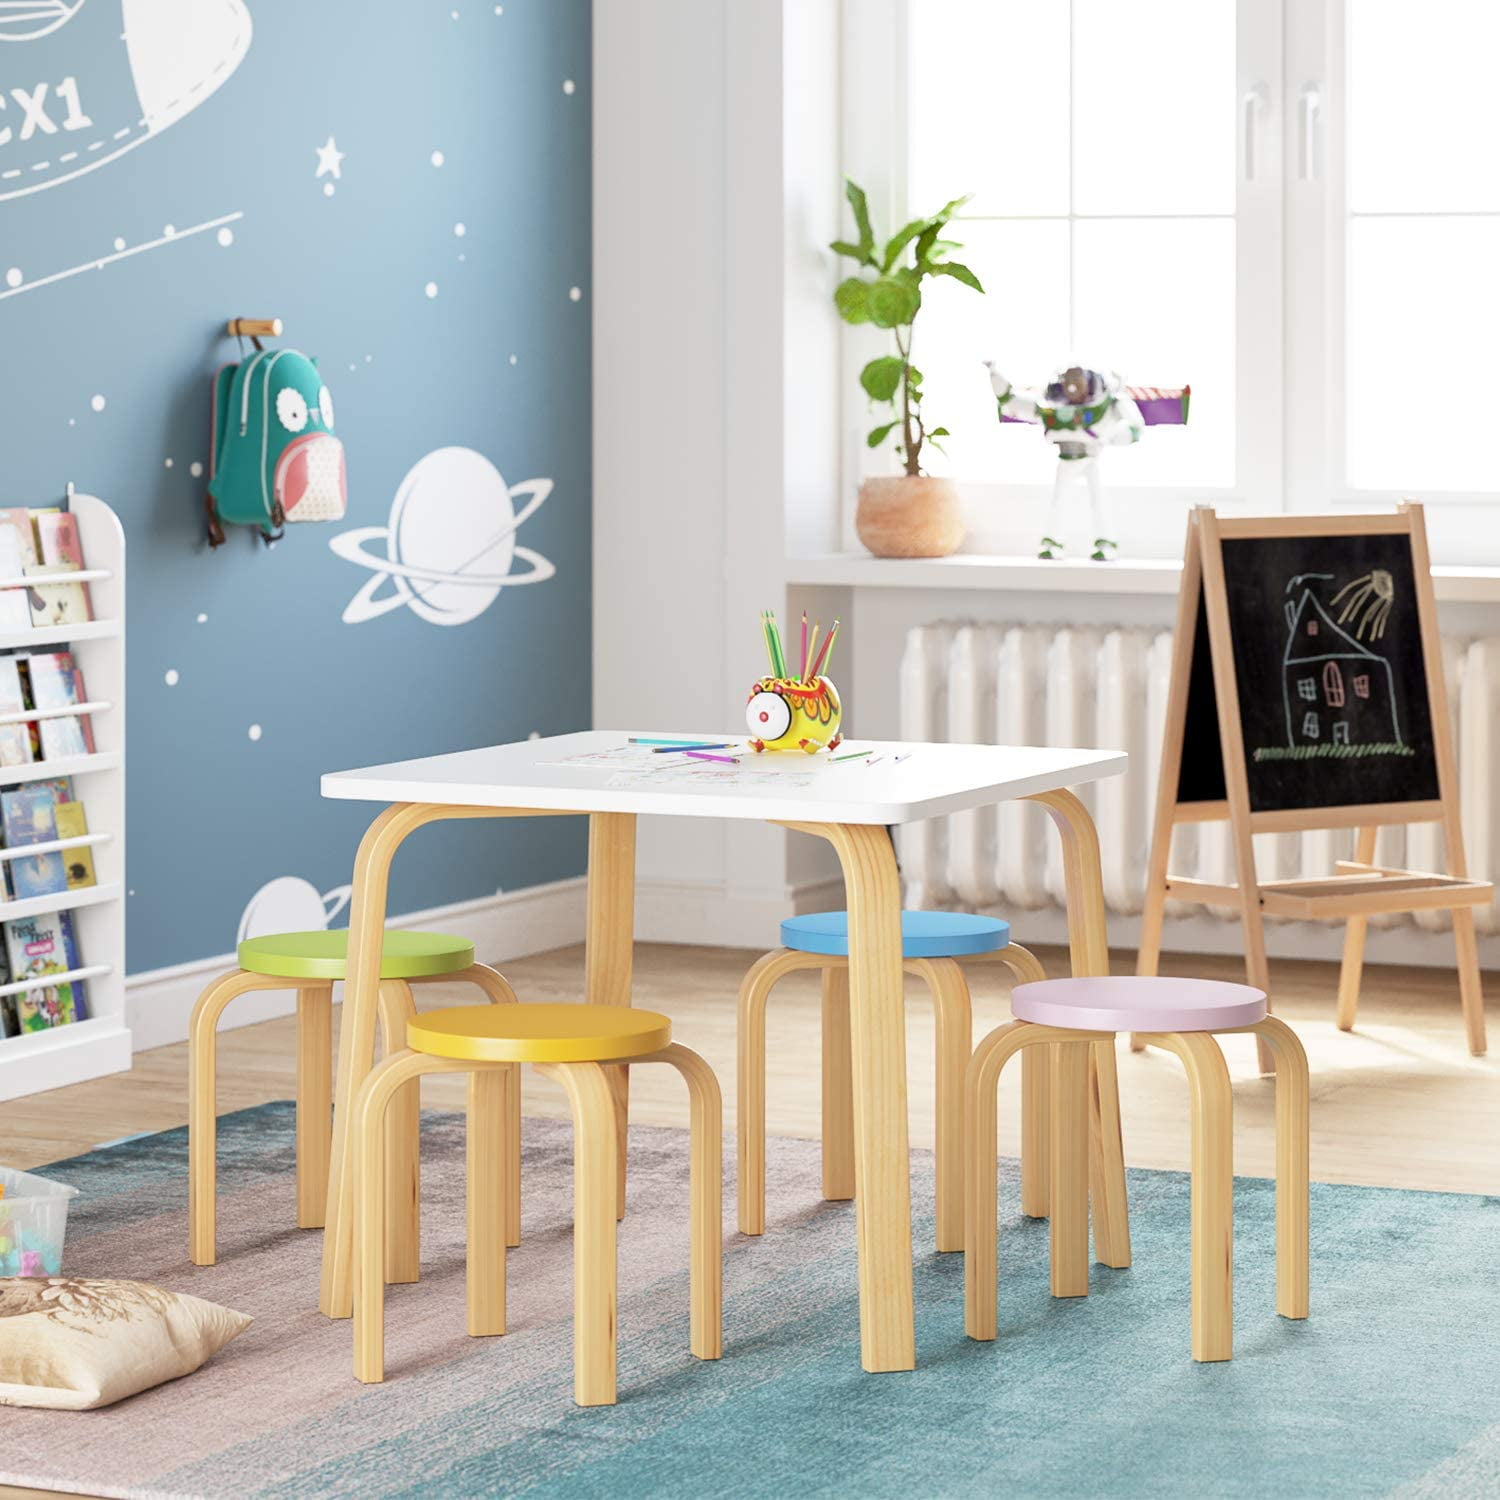 Details about   Kids Activity Table Chair Set Storage Wood Rubber Metal Cartoon Toy Gift Desk 